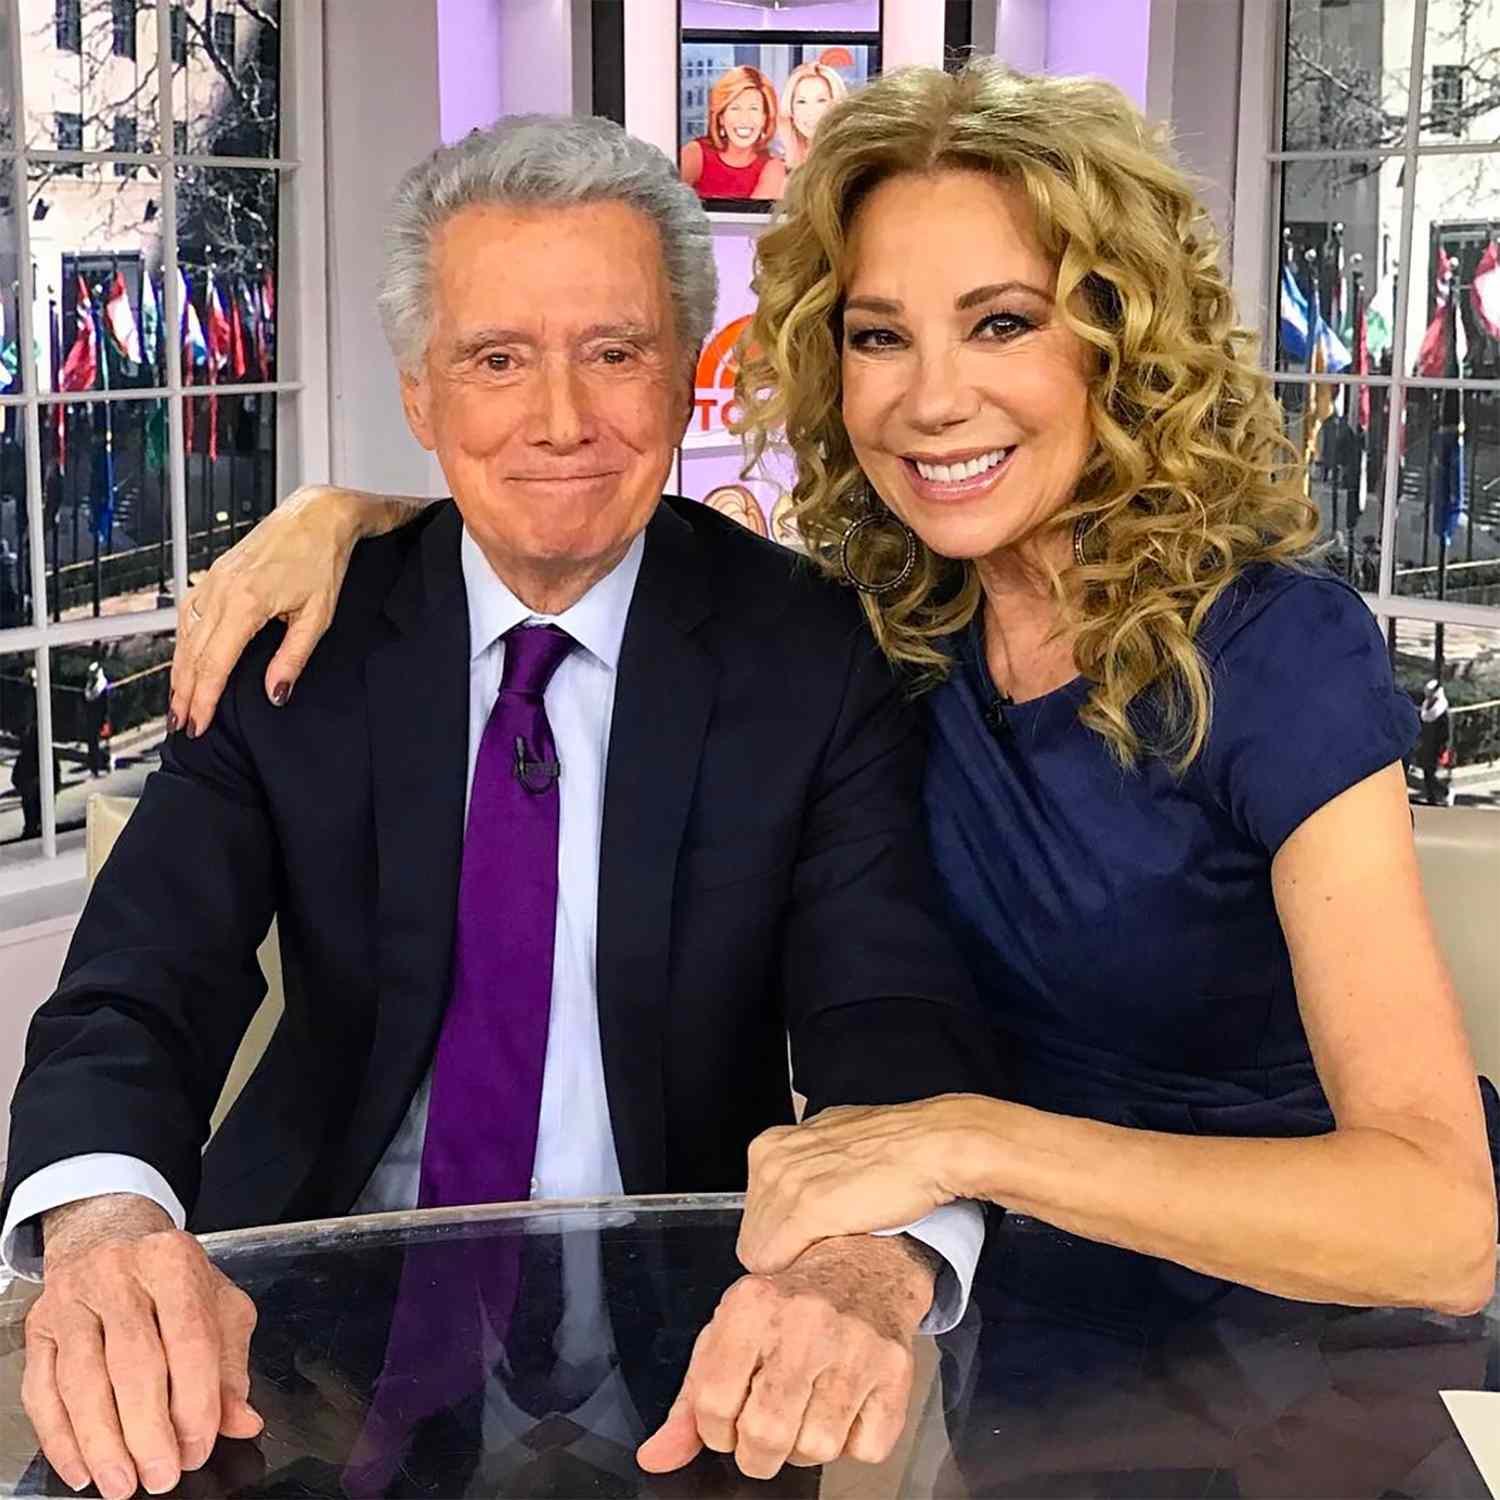 Today: Regis, Kathie Lee Gifford play Newlywed game in reunion 